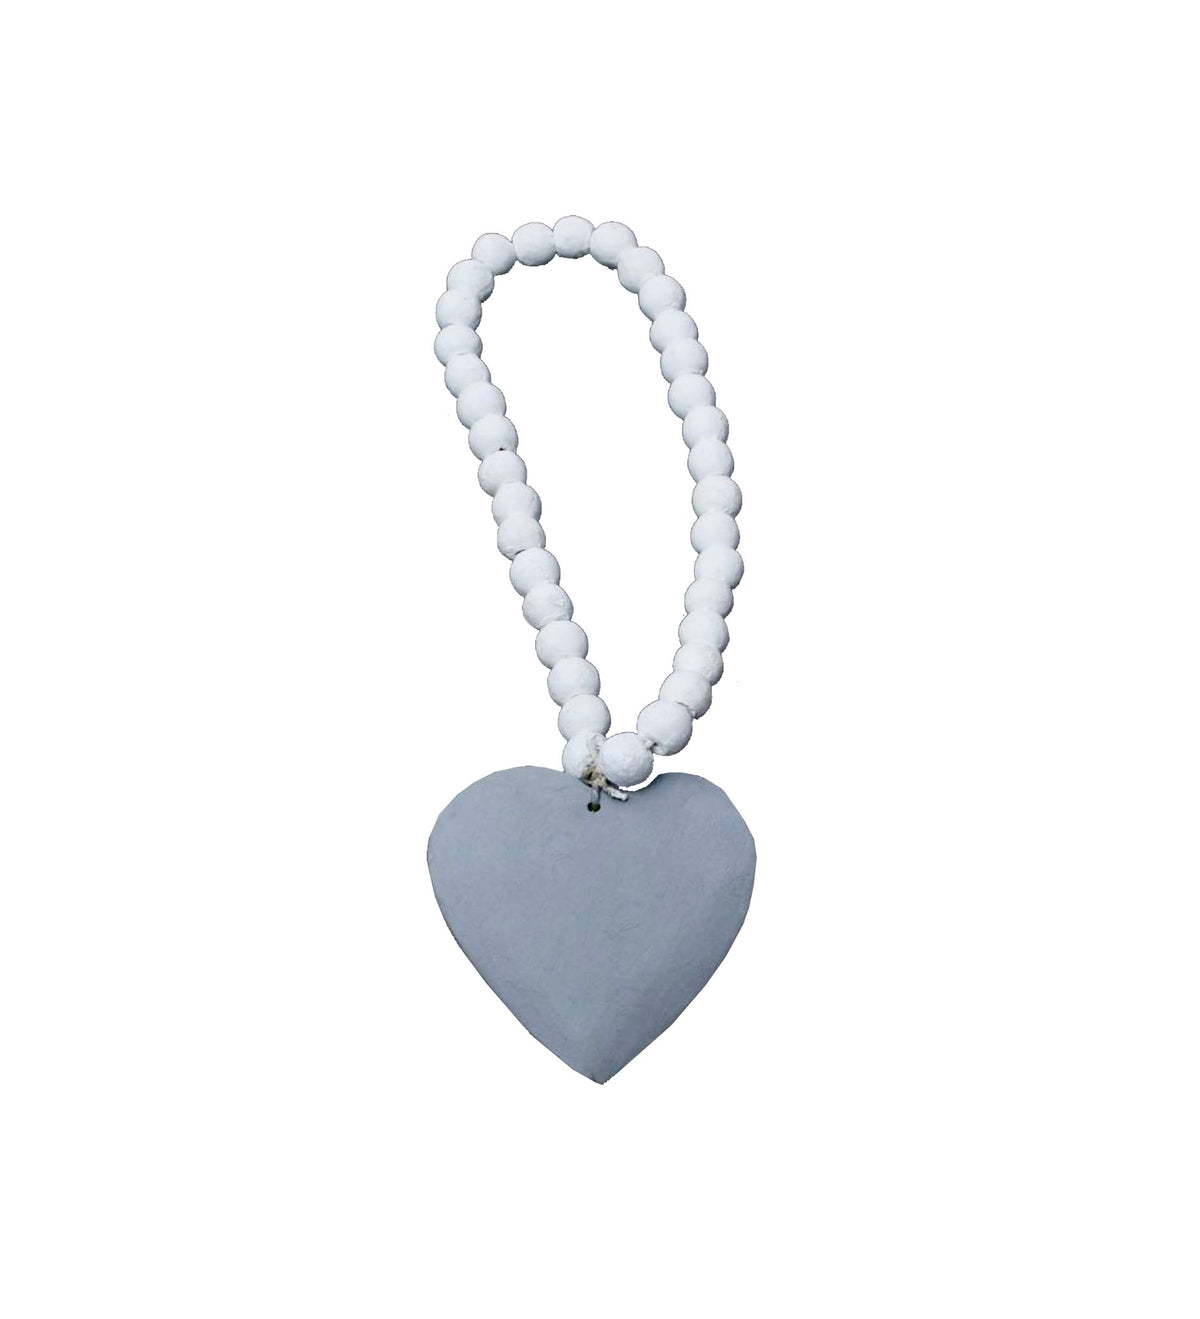 Hanging Beaded Wooden Heart White/Grey